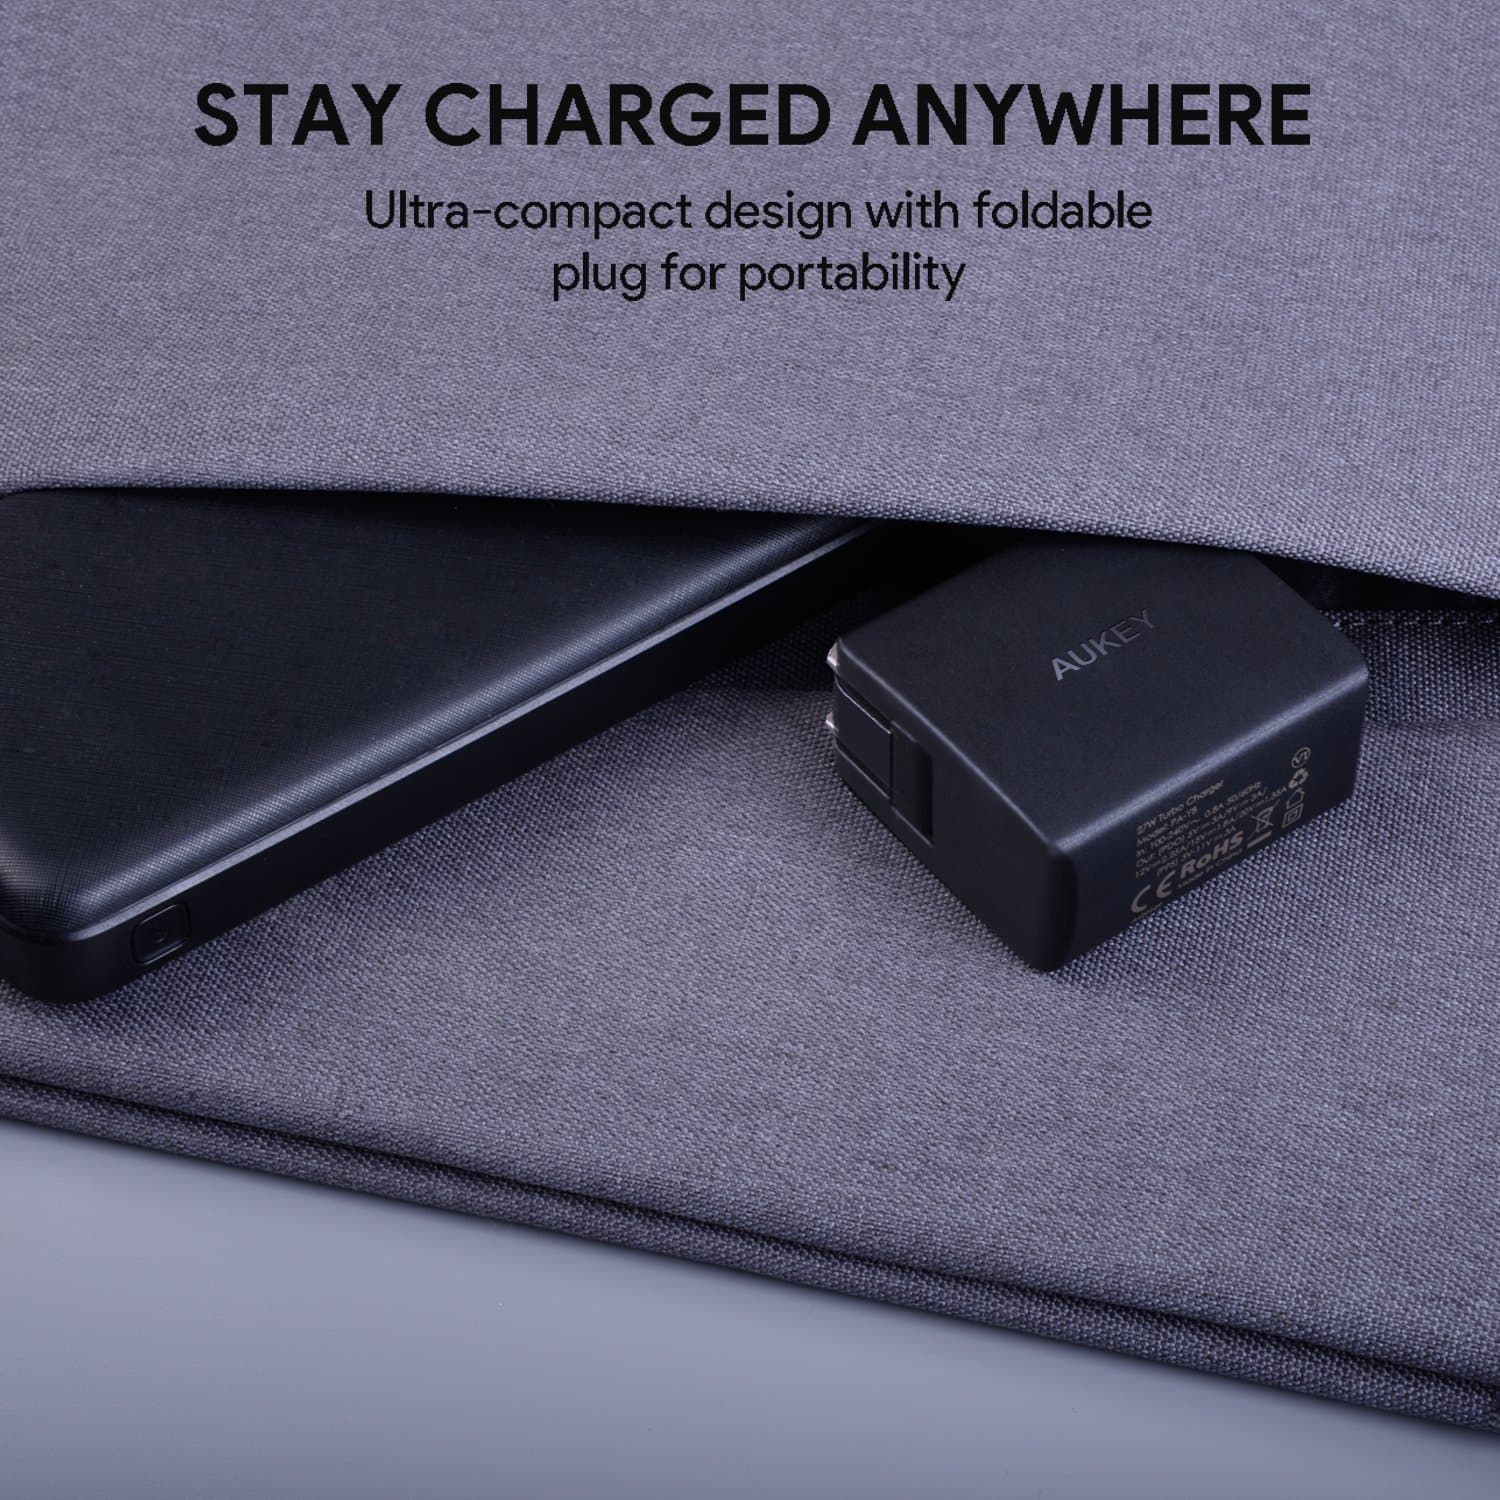 AUKEY PA-Y8 27W Qualcomm Quick Charge 4.0 with Power Delivery 3.0 Charger - EU Plug - Aukey Malaysia Official Store